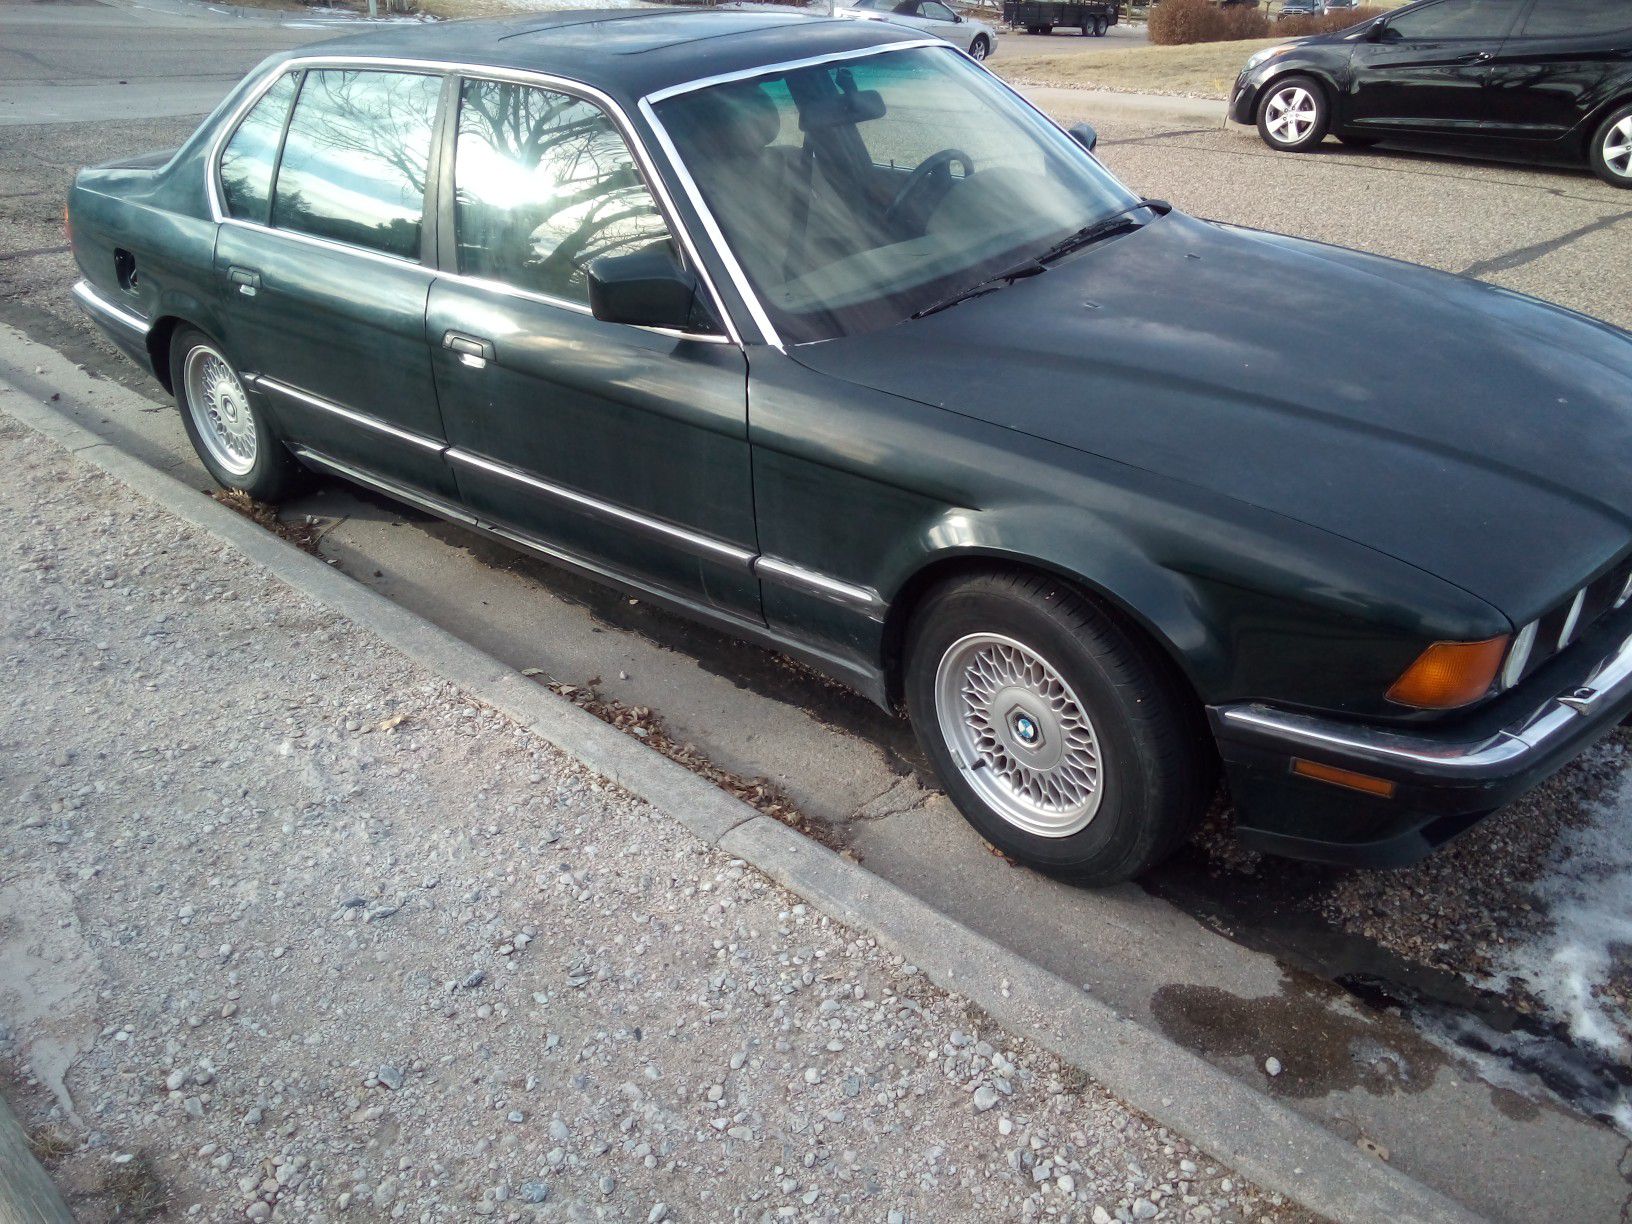 BMW 1994 740il fair condition500needs fuel pump or maybe the fuel filter